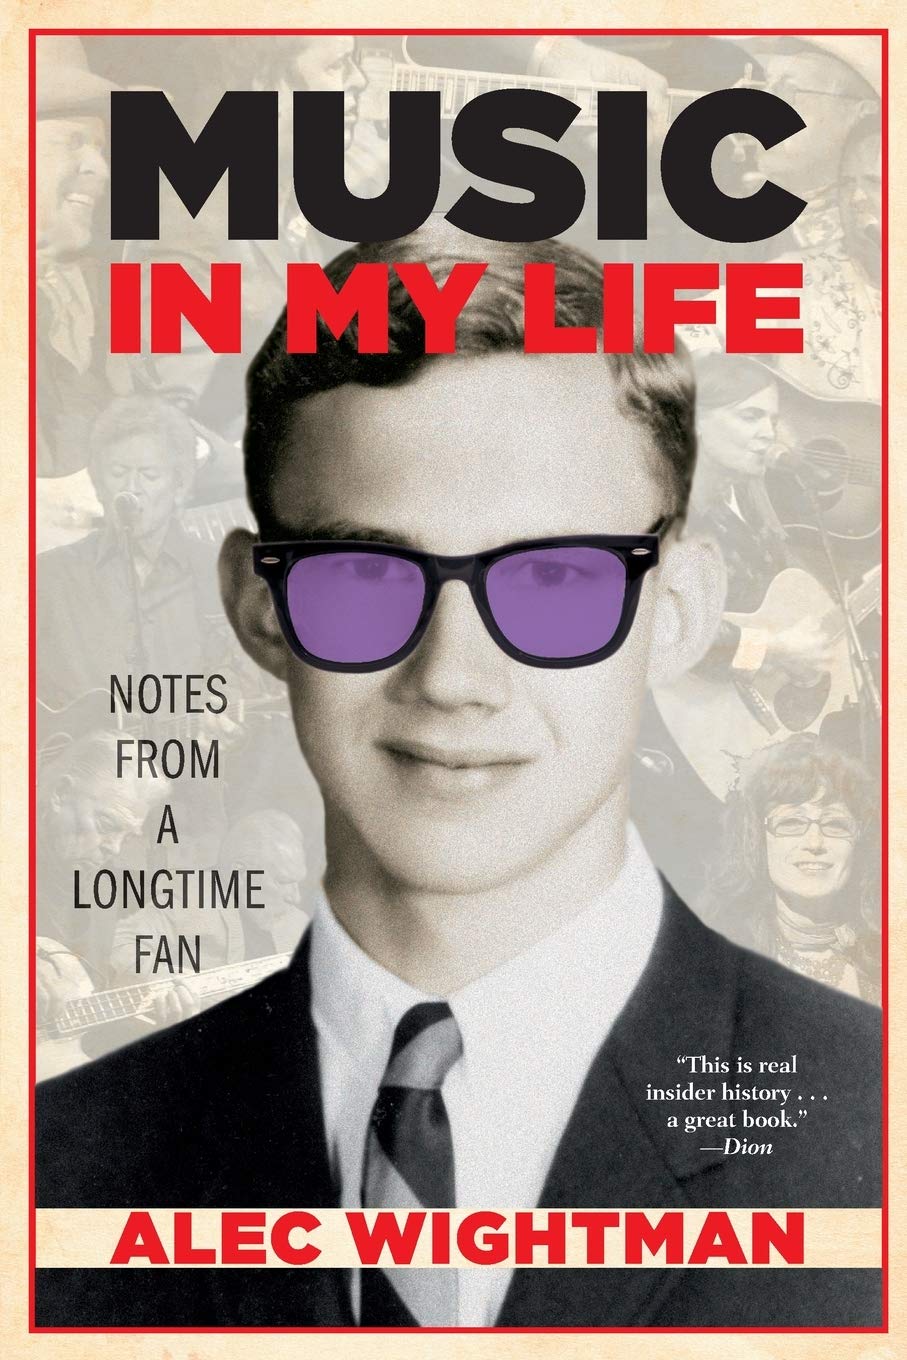 The cover of Music in My Life shows a black and white photo of a young, clean-cut man wearing sunglasses